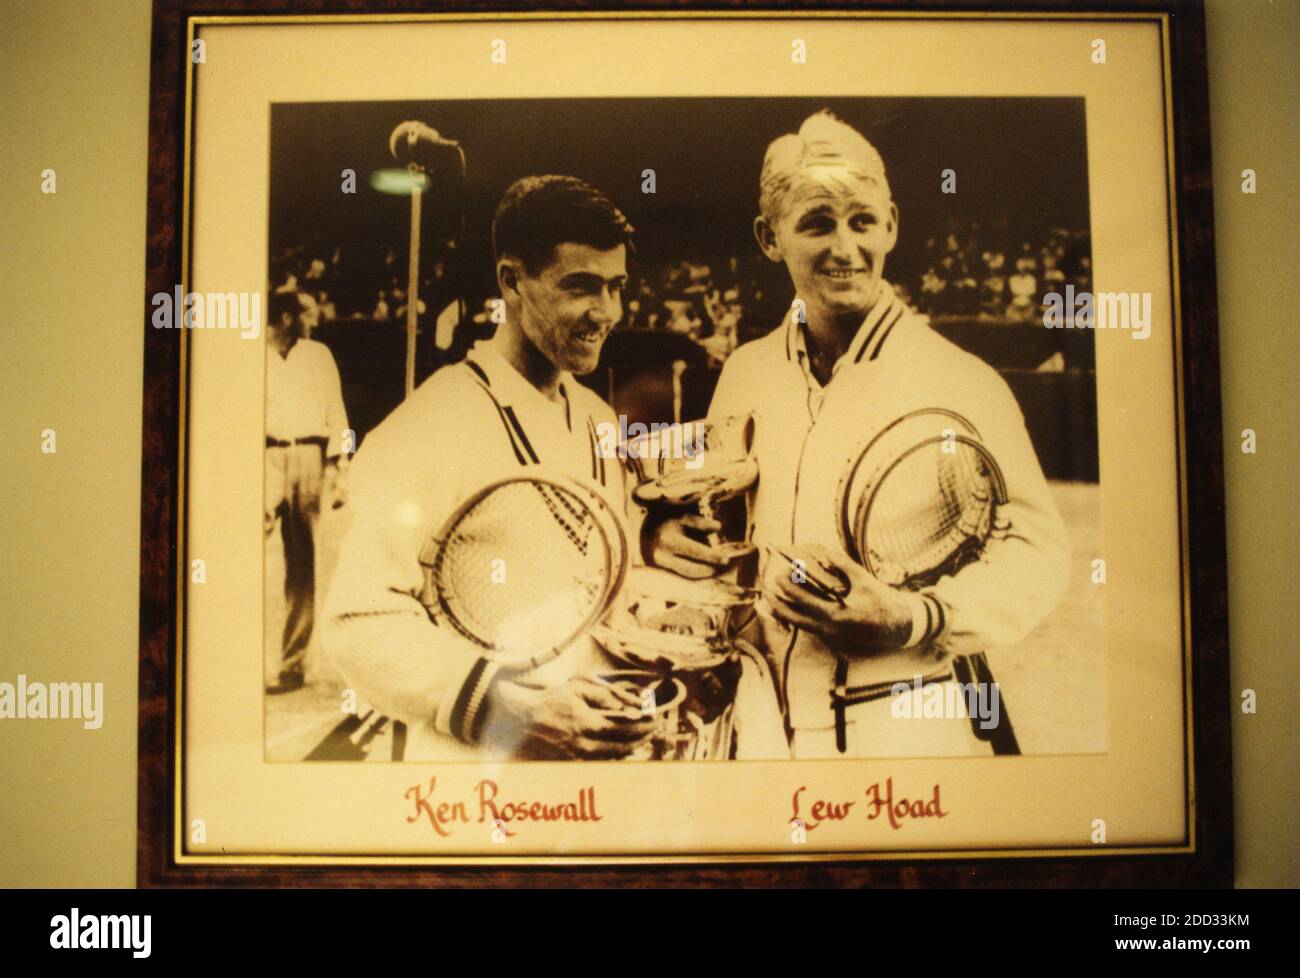 Framed picture of Australian tennis players Ken Rosewall and Lew Hoad framed at Kooyong Lawn Tennis Club, Melbourne Park, Australia 2001 Stock Photo